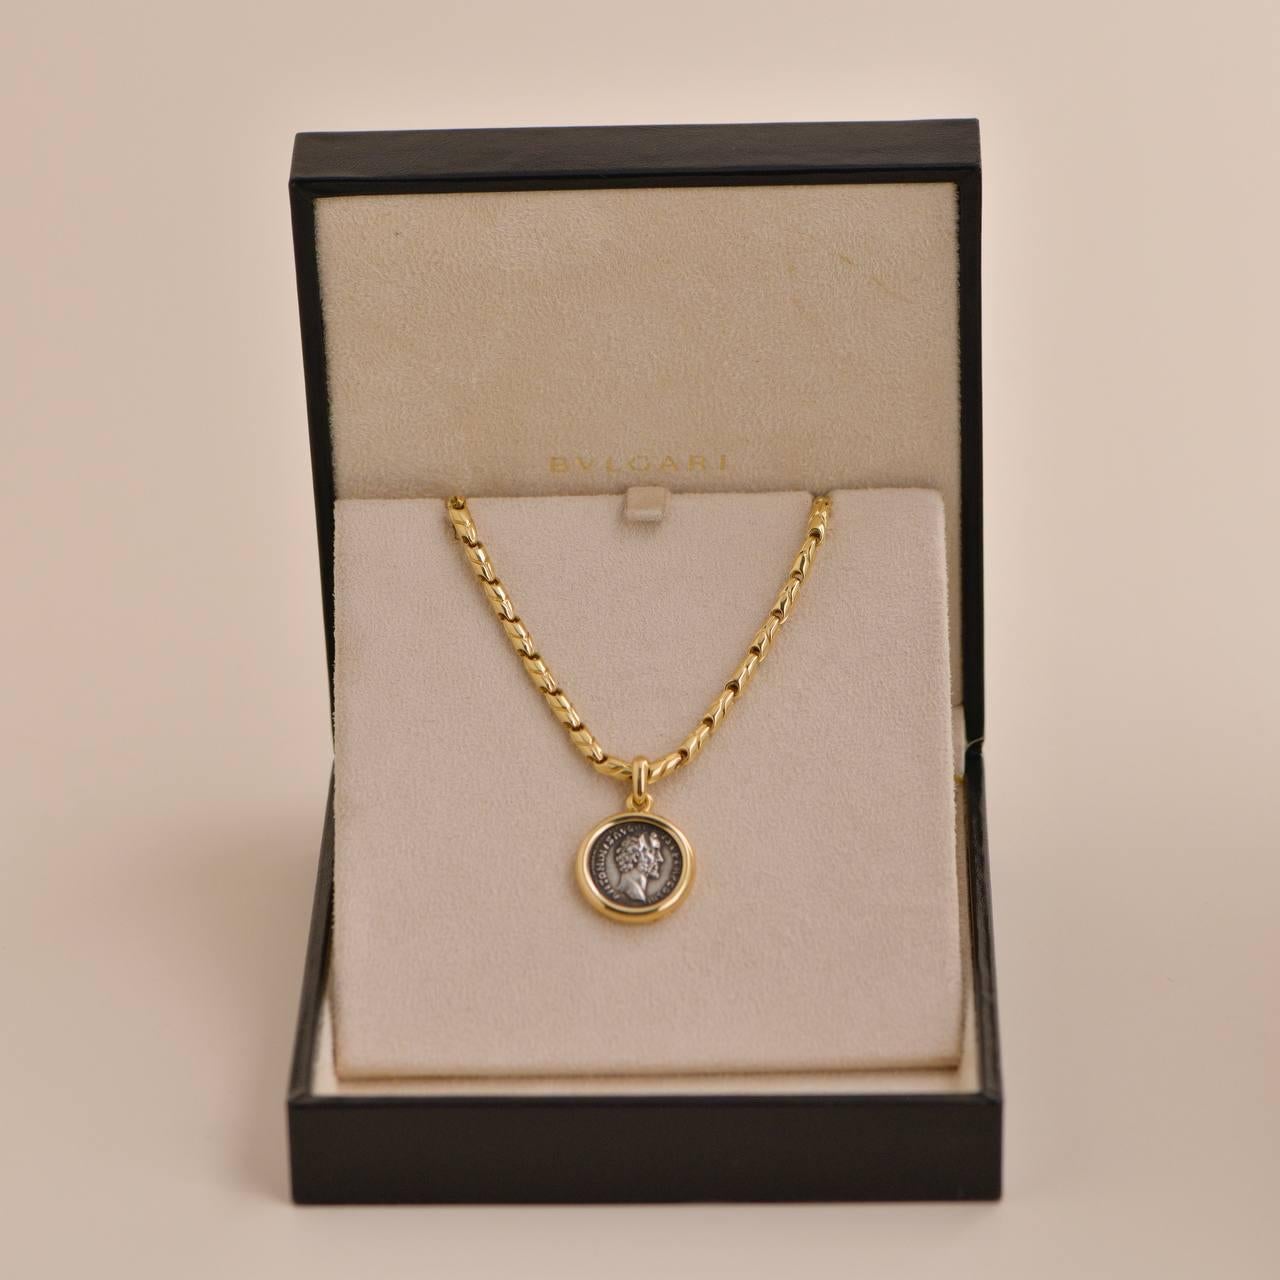 *Rare Find* This fabulous Bvlagri Monete pendant is crafted in 18K yellow gold set with a unique ancient Roman coin. The back of the coin is inscribed GORDIANUS AUG
AD 230-244. Stamped Bvlgari. Made in Italy. Monete is one of Bulgari's signature